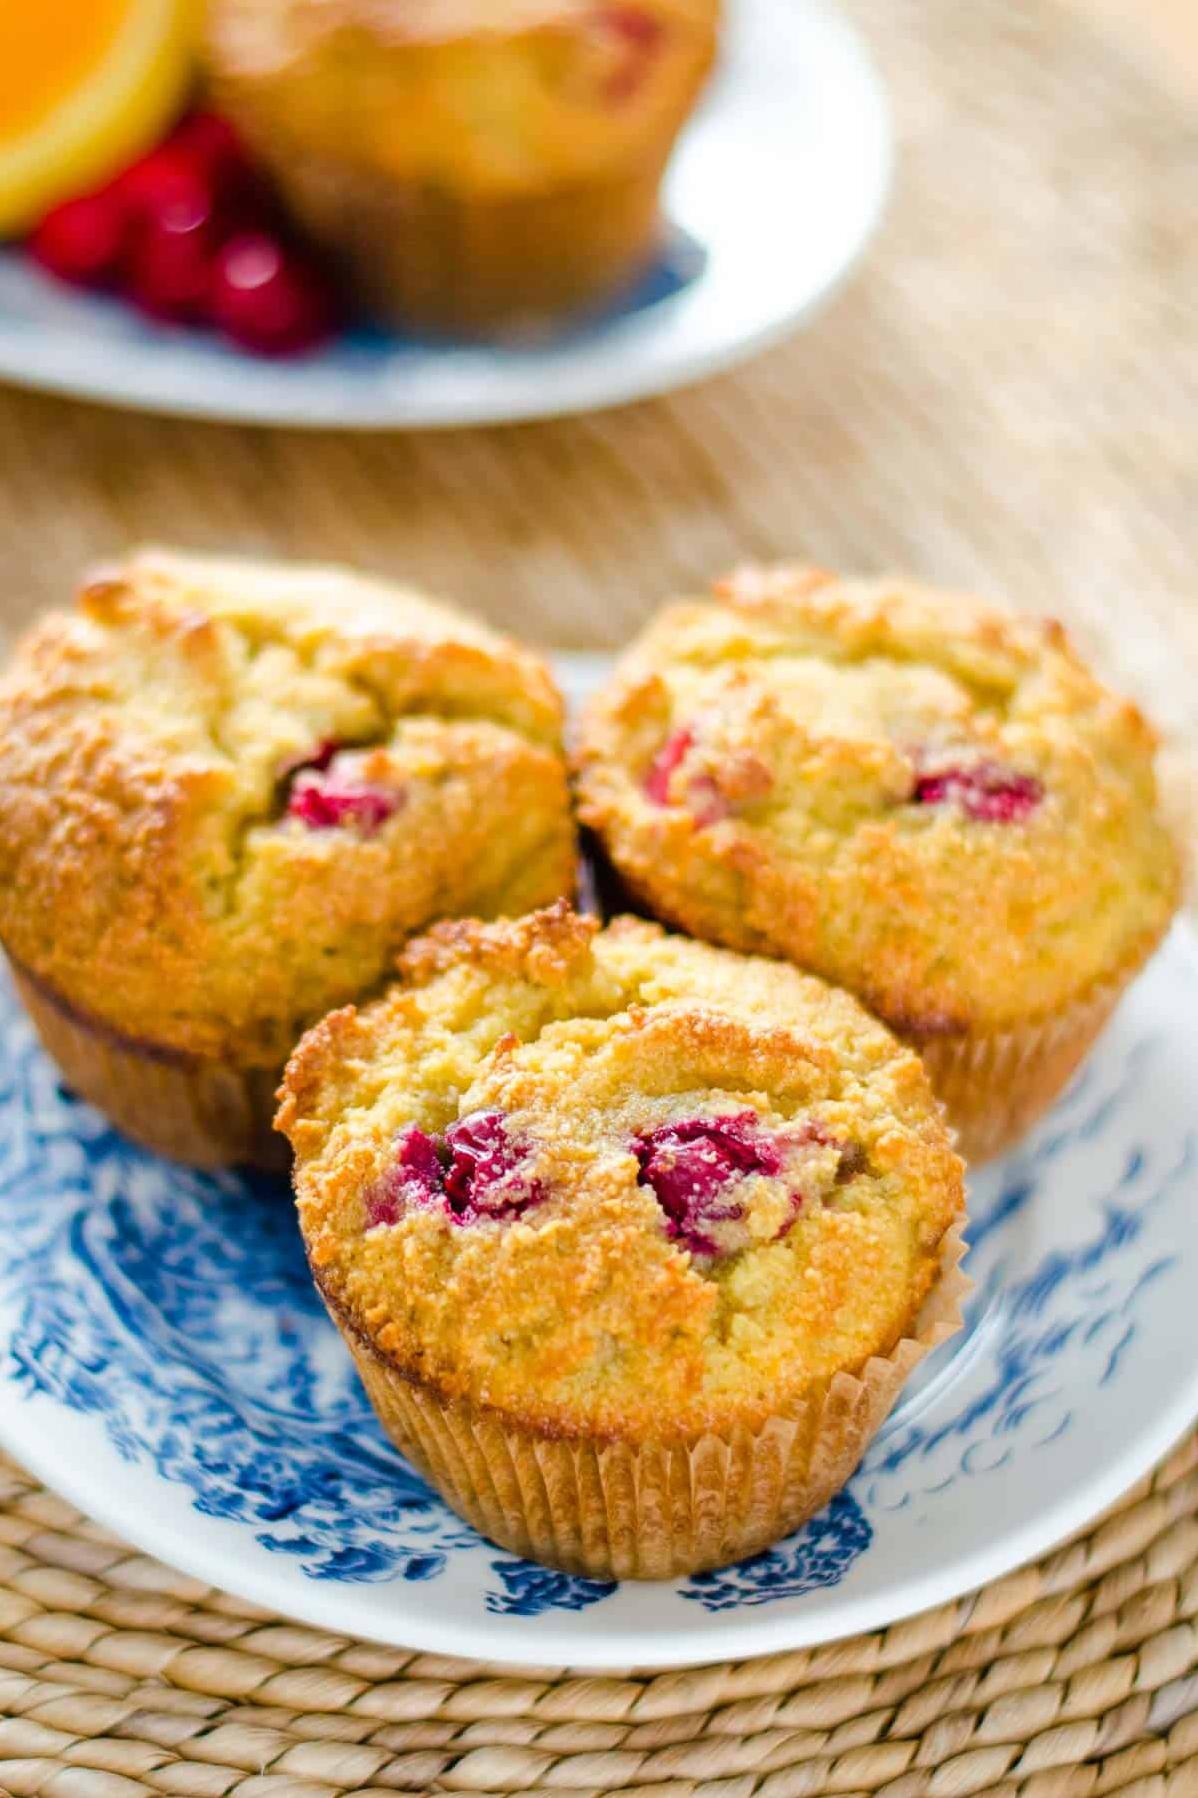  You won't believe these muffins are dairy-free